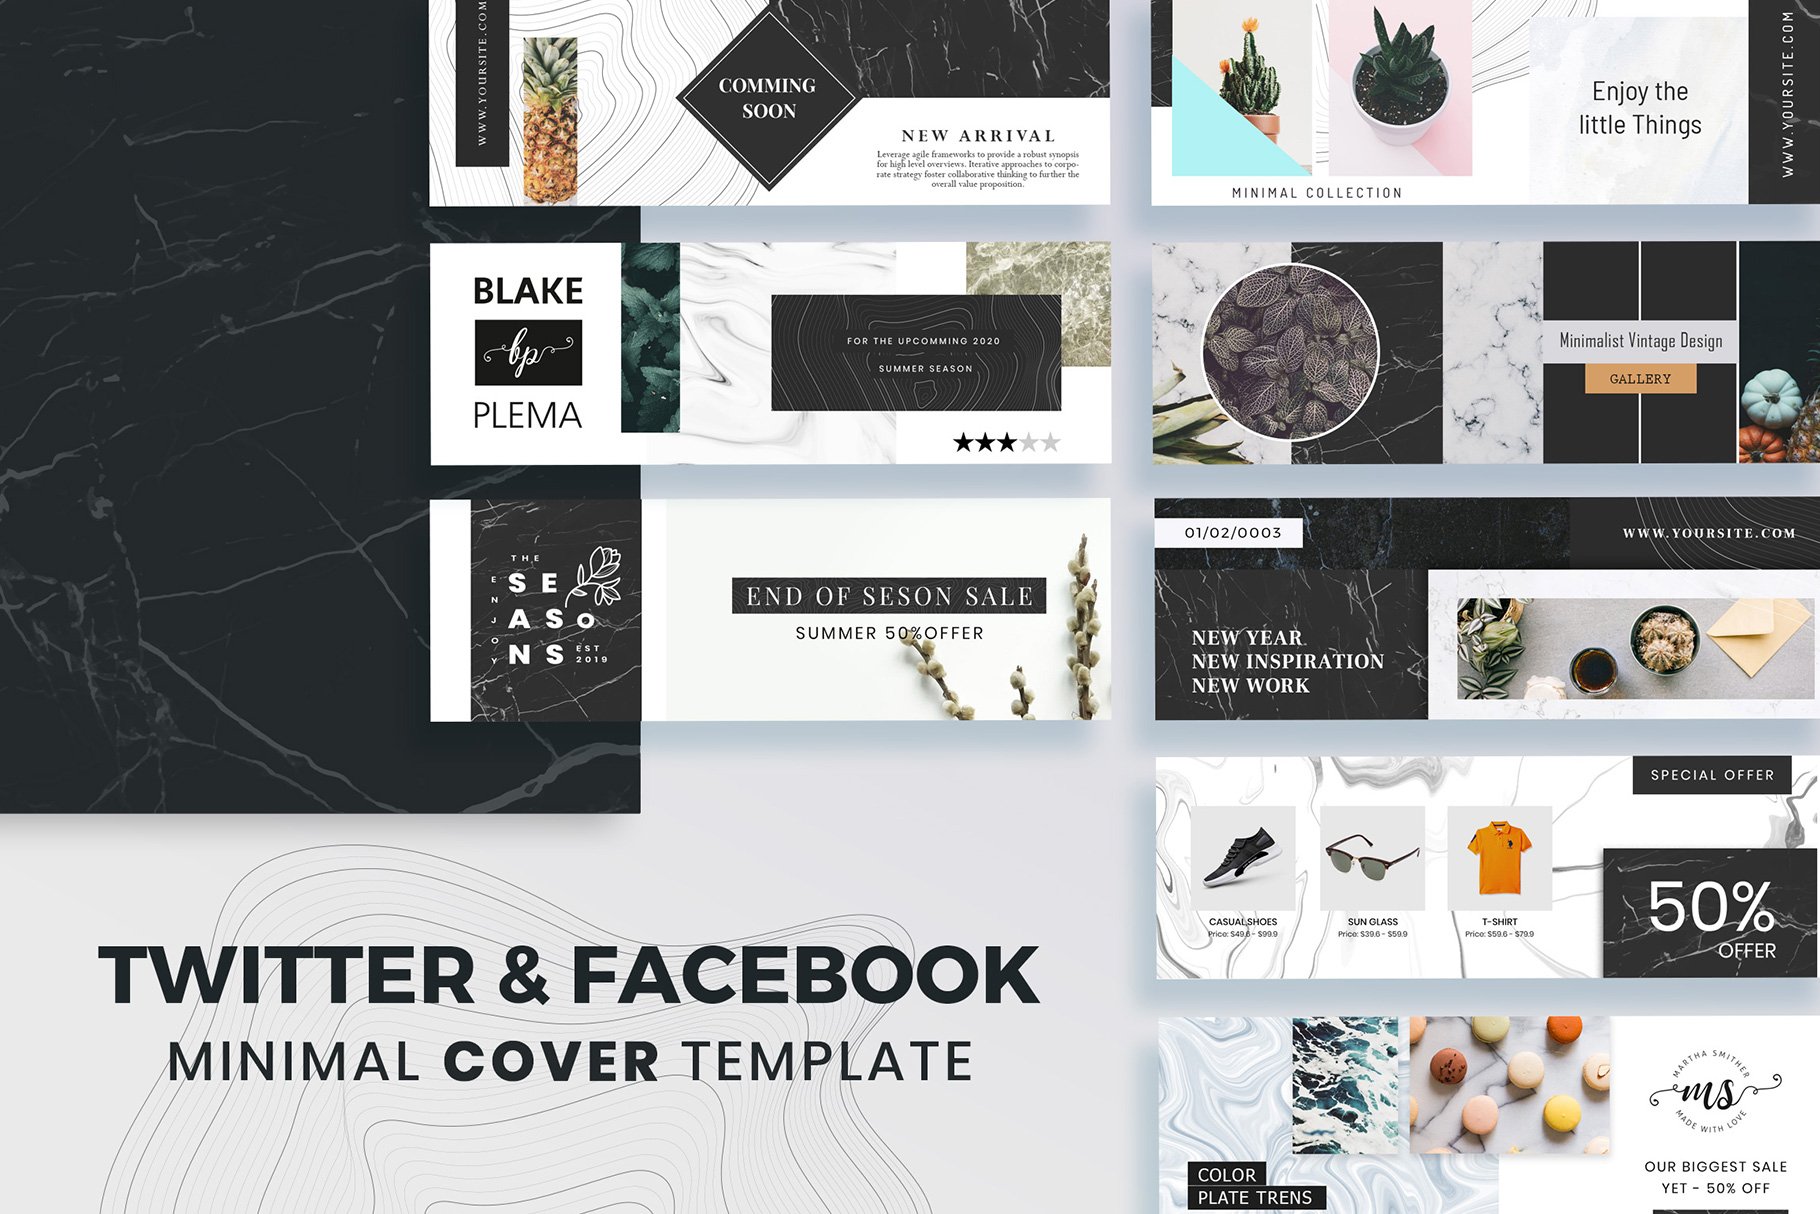 Facebook & Twitter Cover Template cover image.